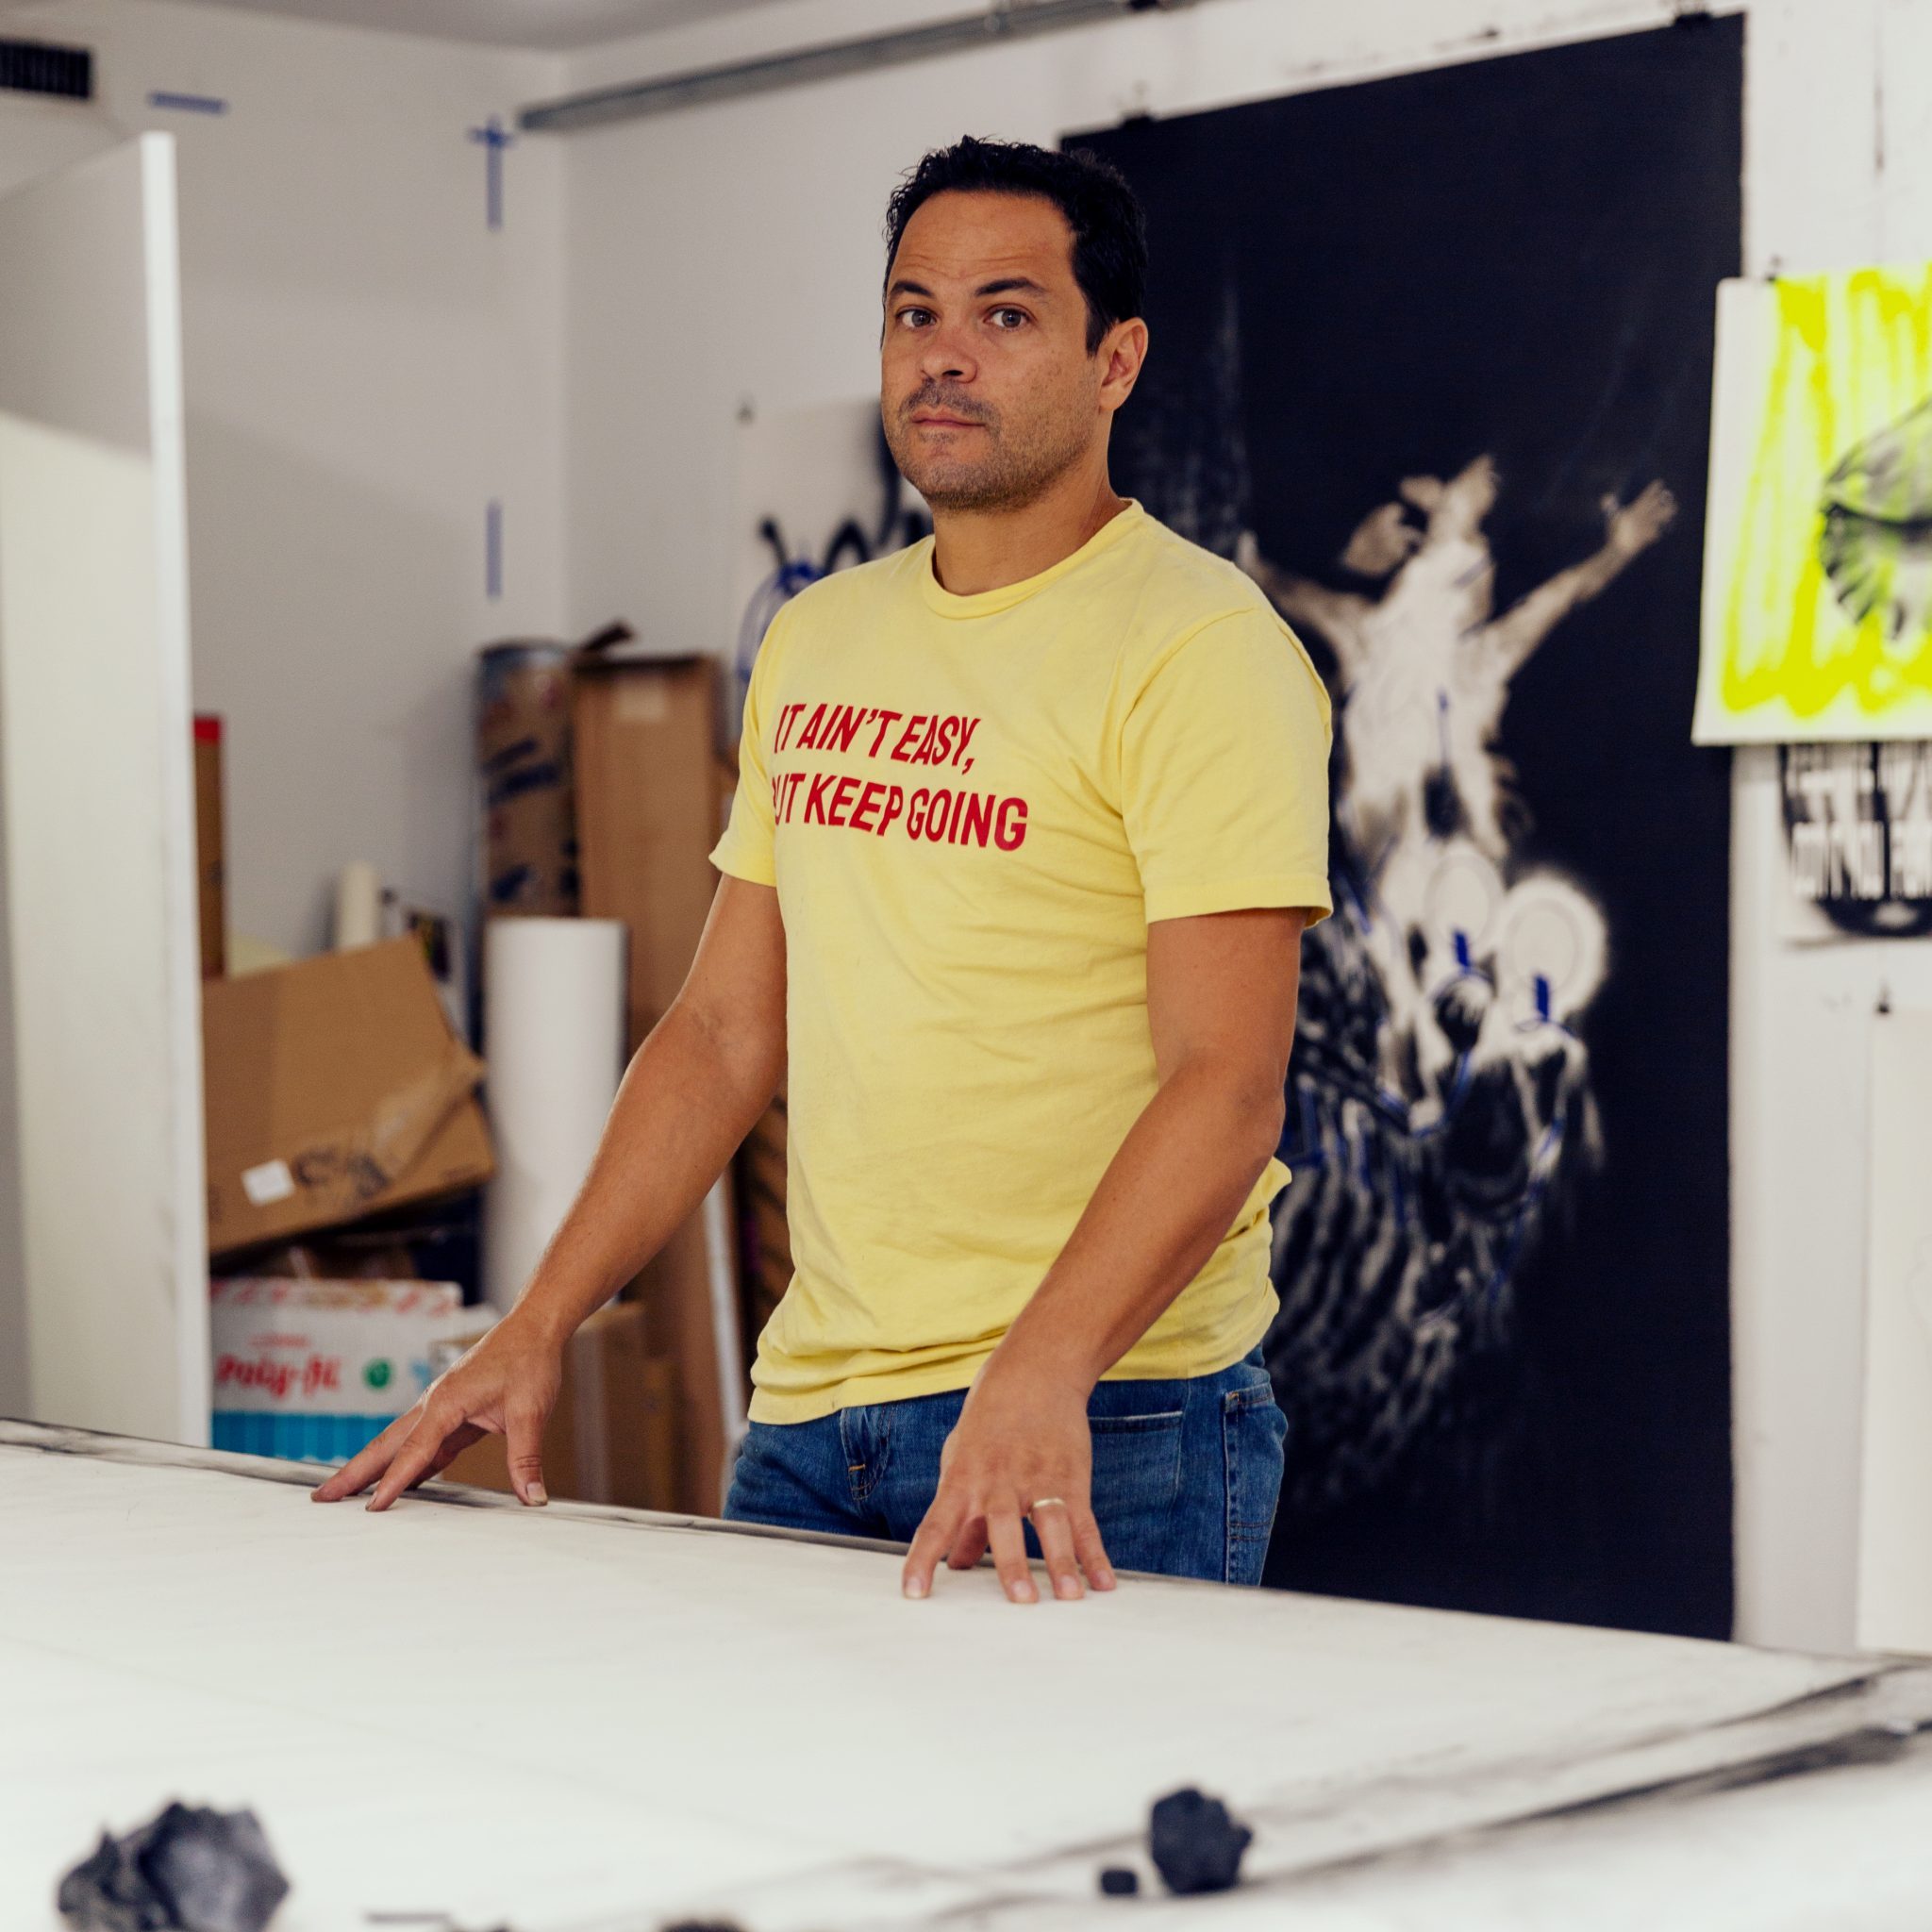 Gonzalo Fuenmayor at his aart studio, he recently purchased a home in the neighborhood of Miami Shores, Miami FL, July 28, 2021.